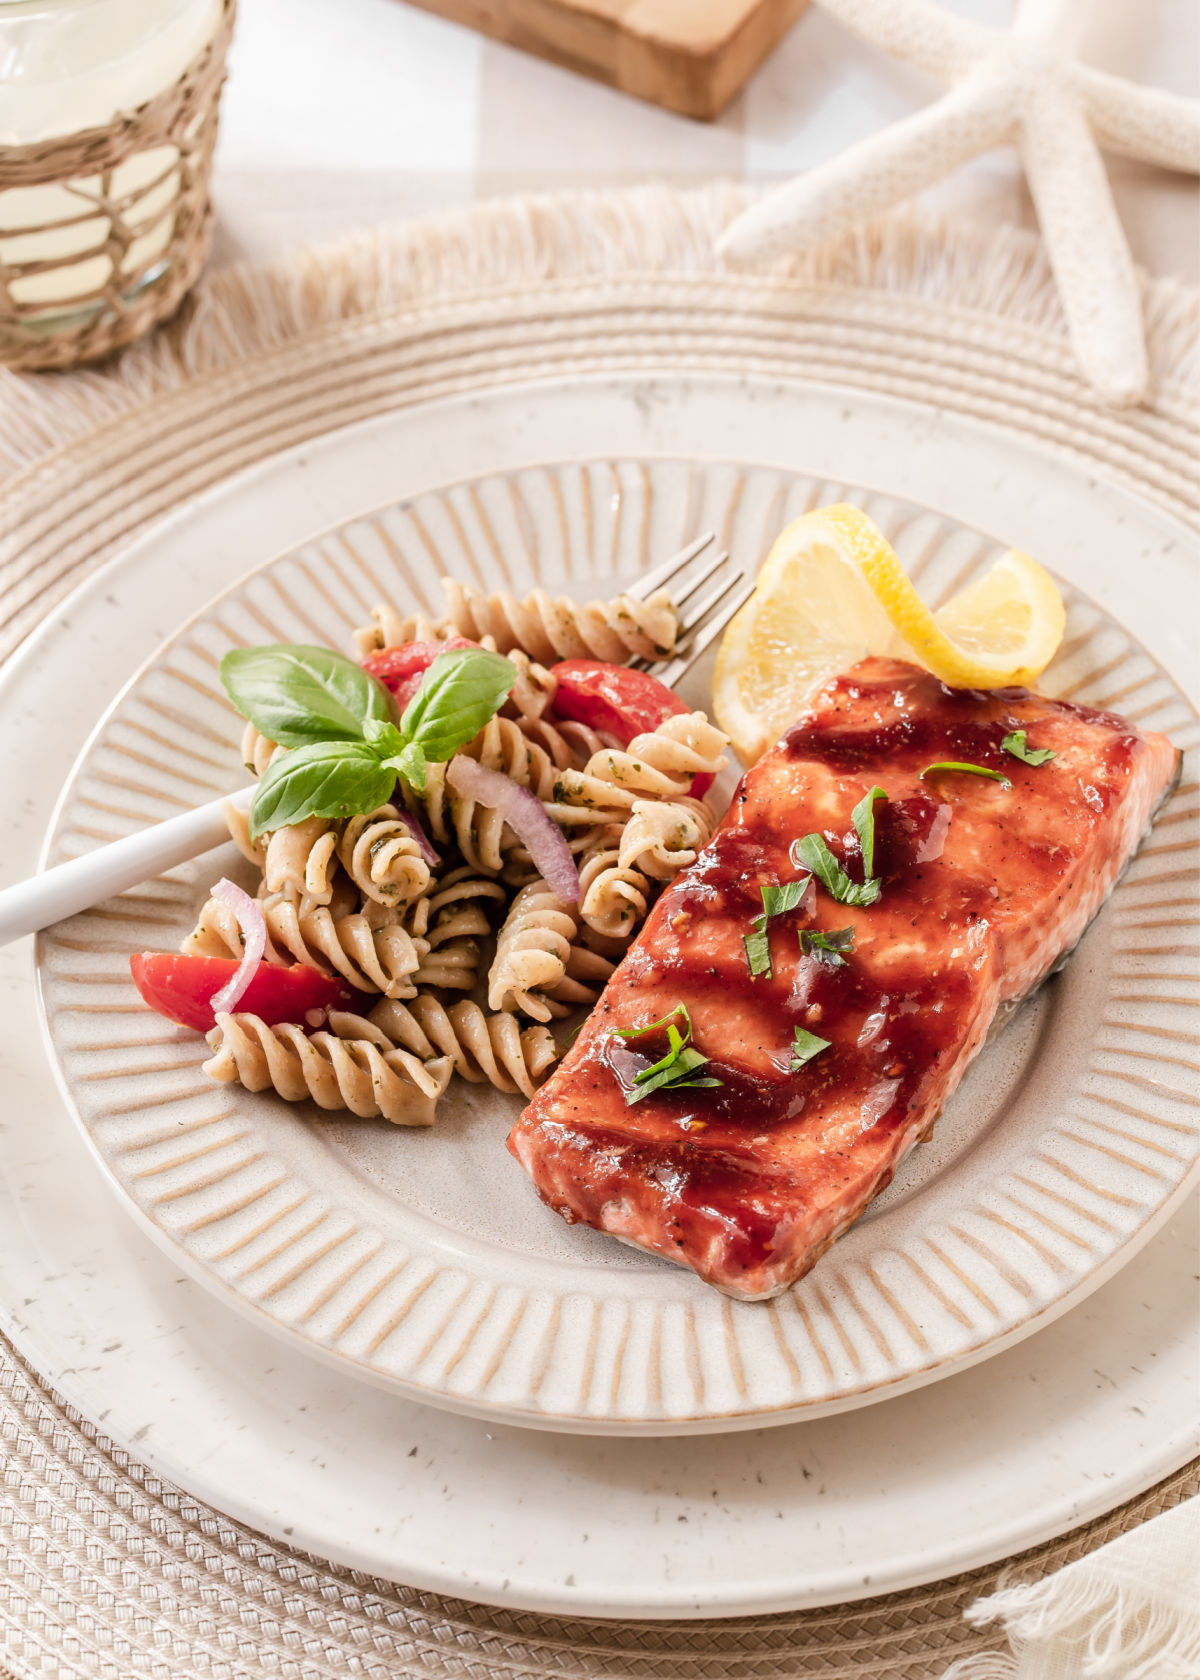 plate on table with salmon and pasta salad.